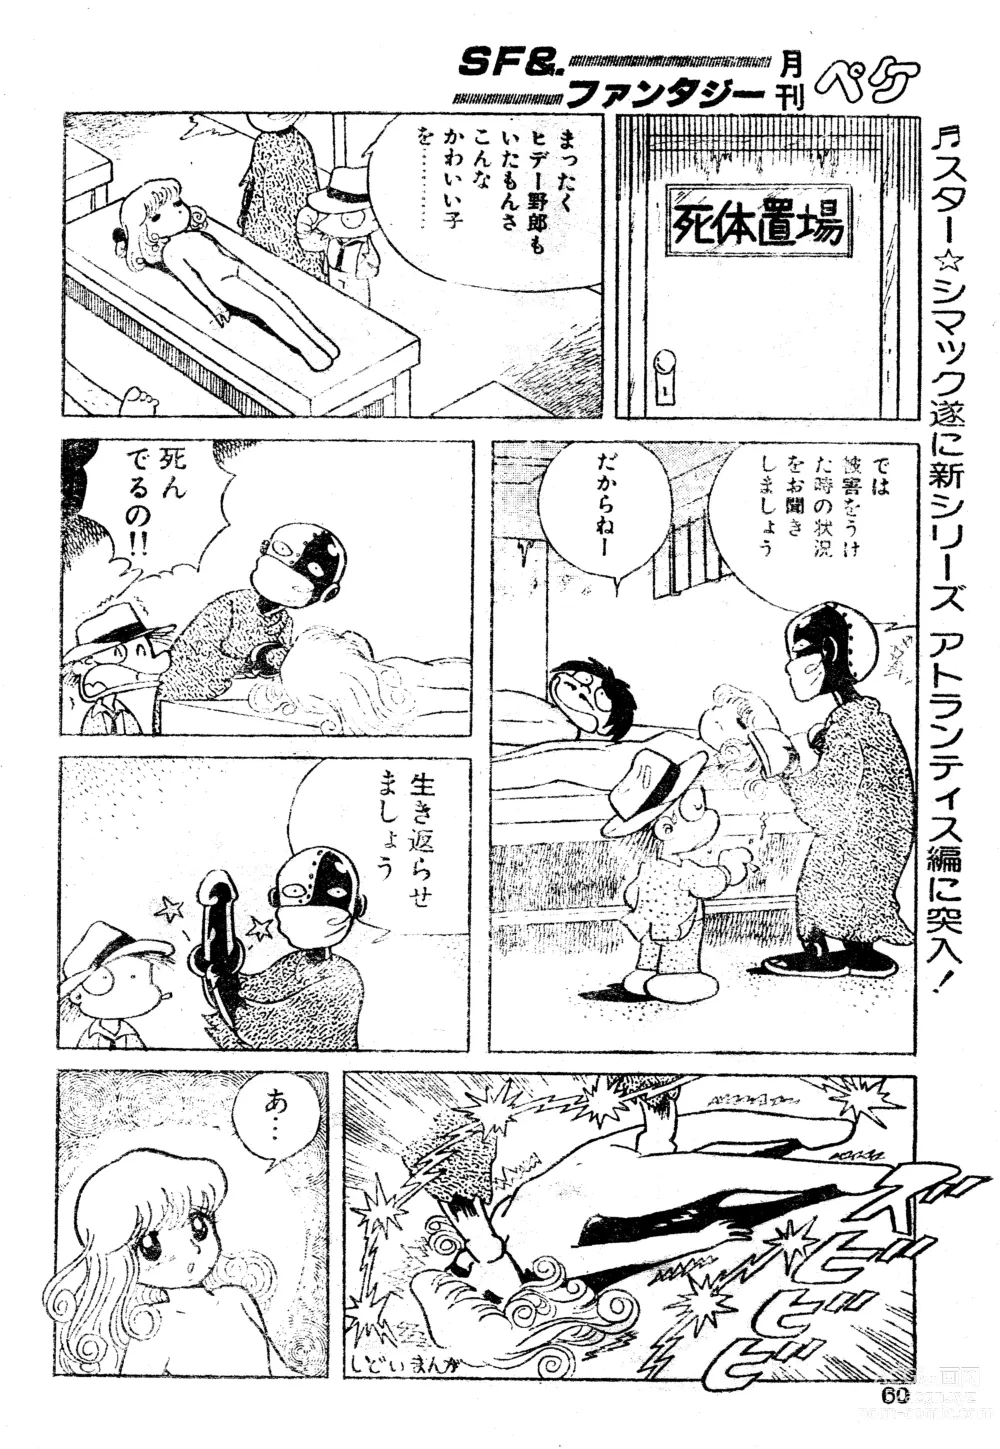 Page 31 of manga Dodemo inner space